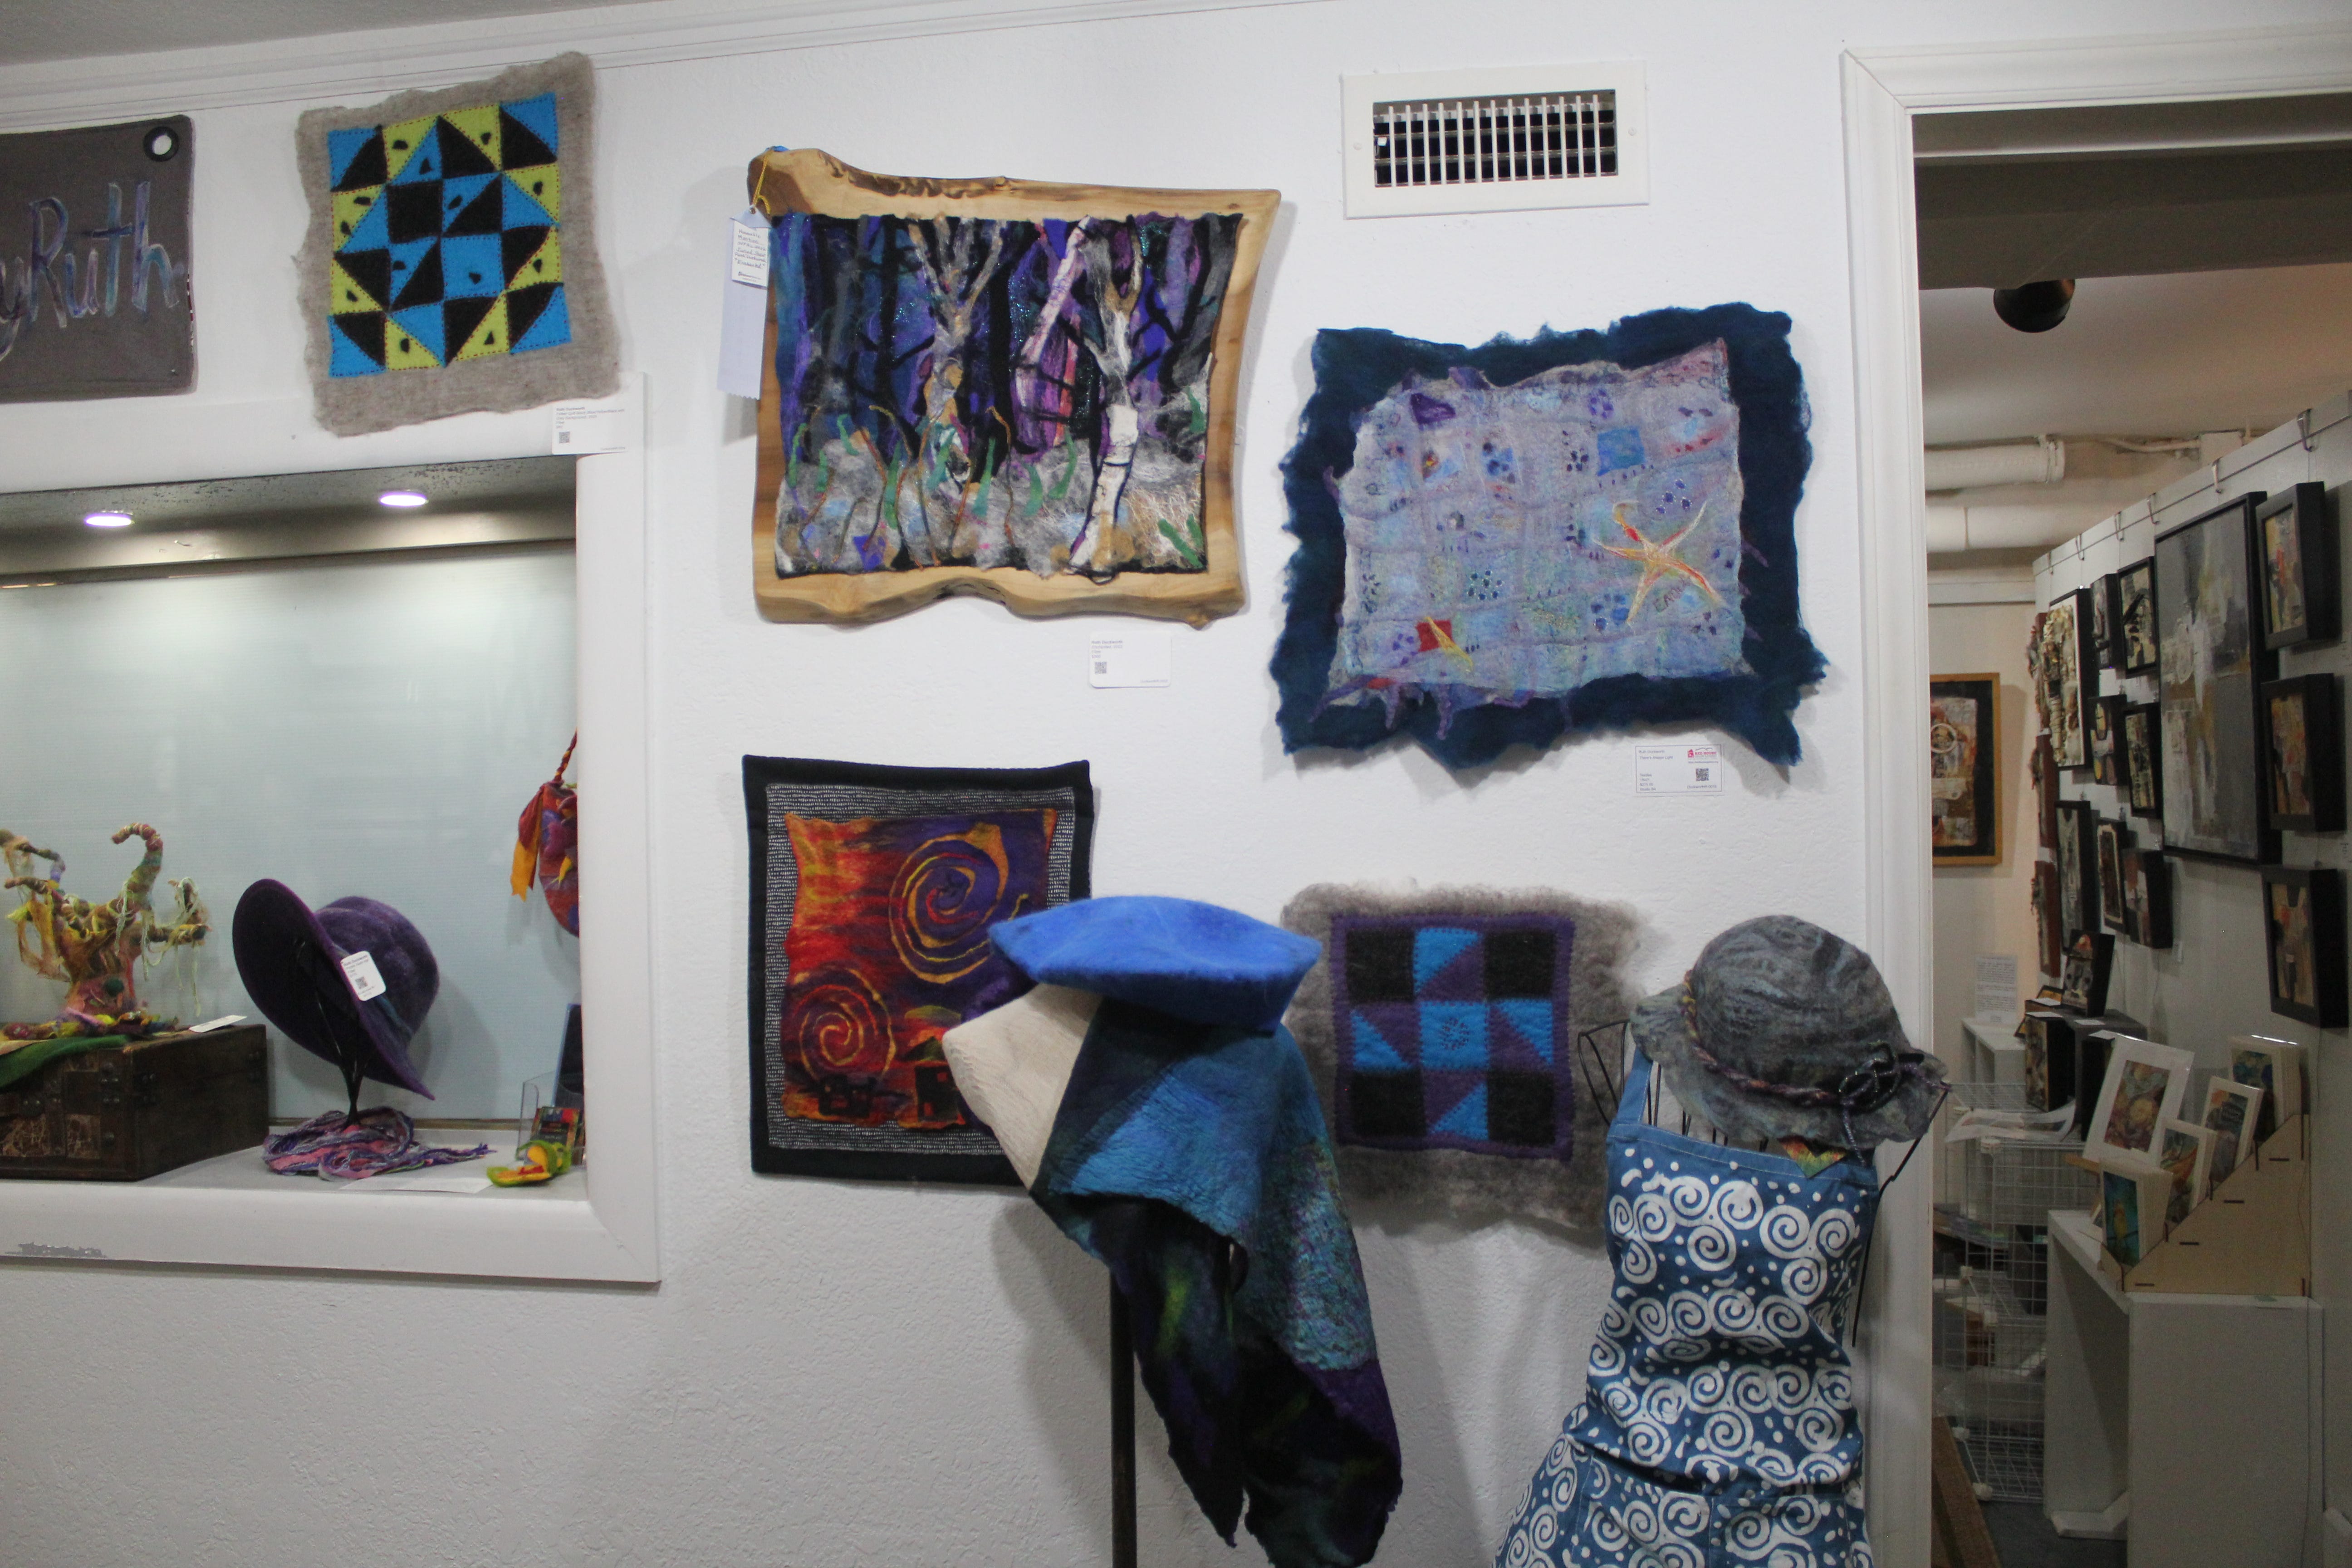 Artist Ruth Duckworth has a studio on the bottom floor of the Red House Gallery.